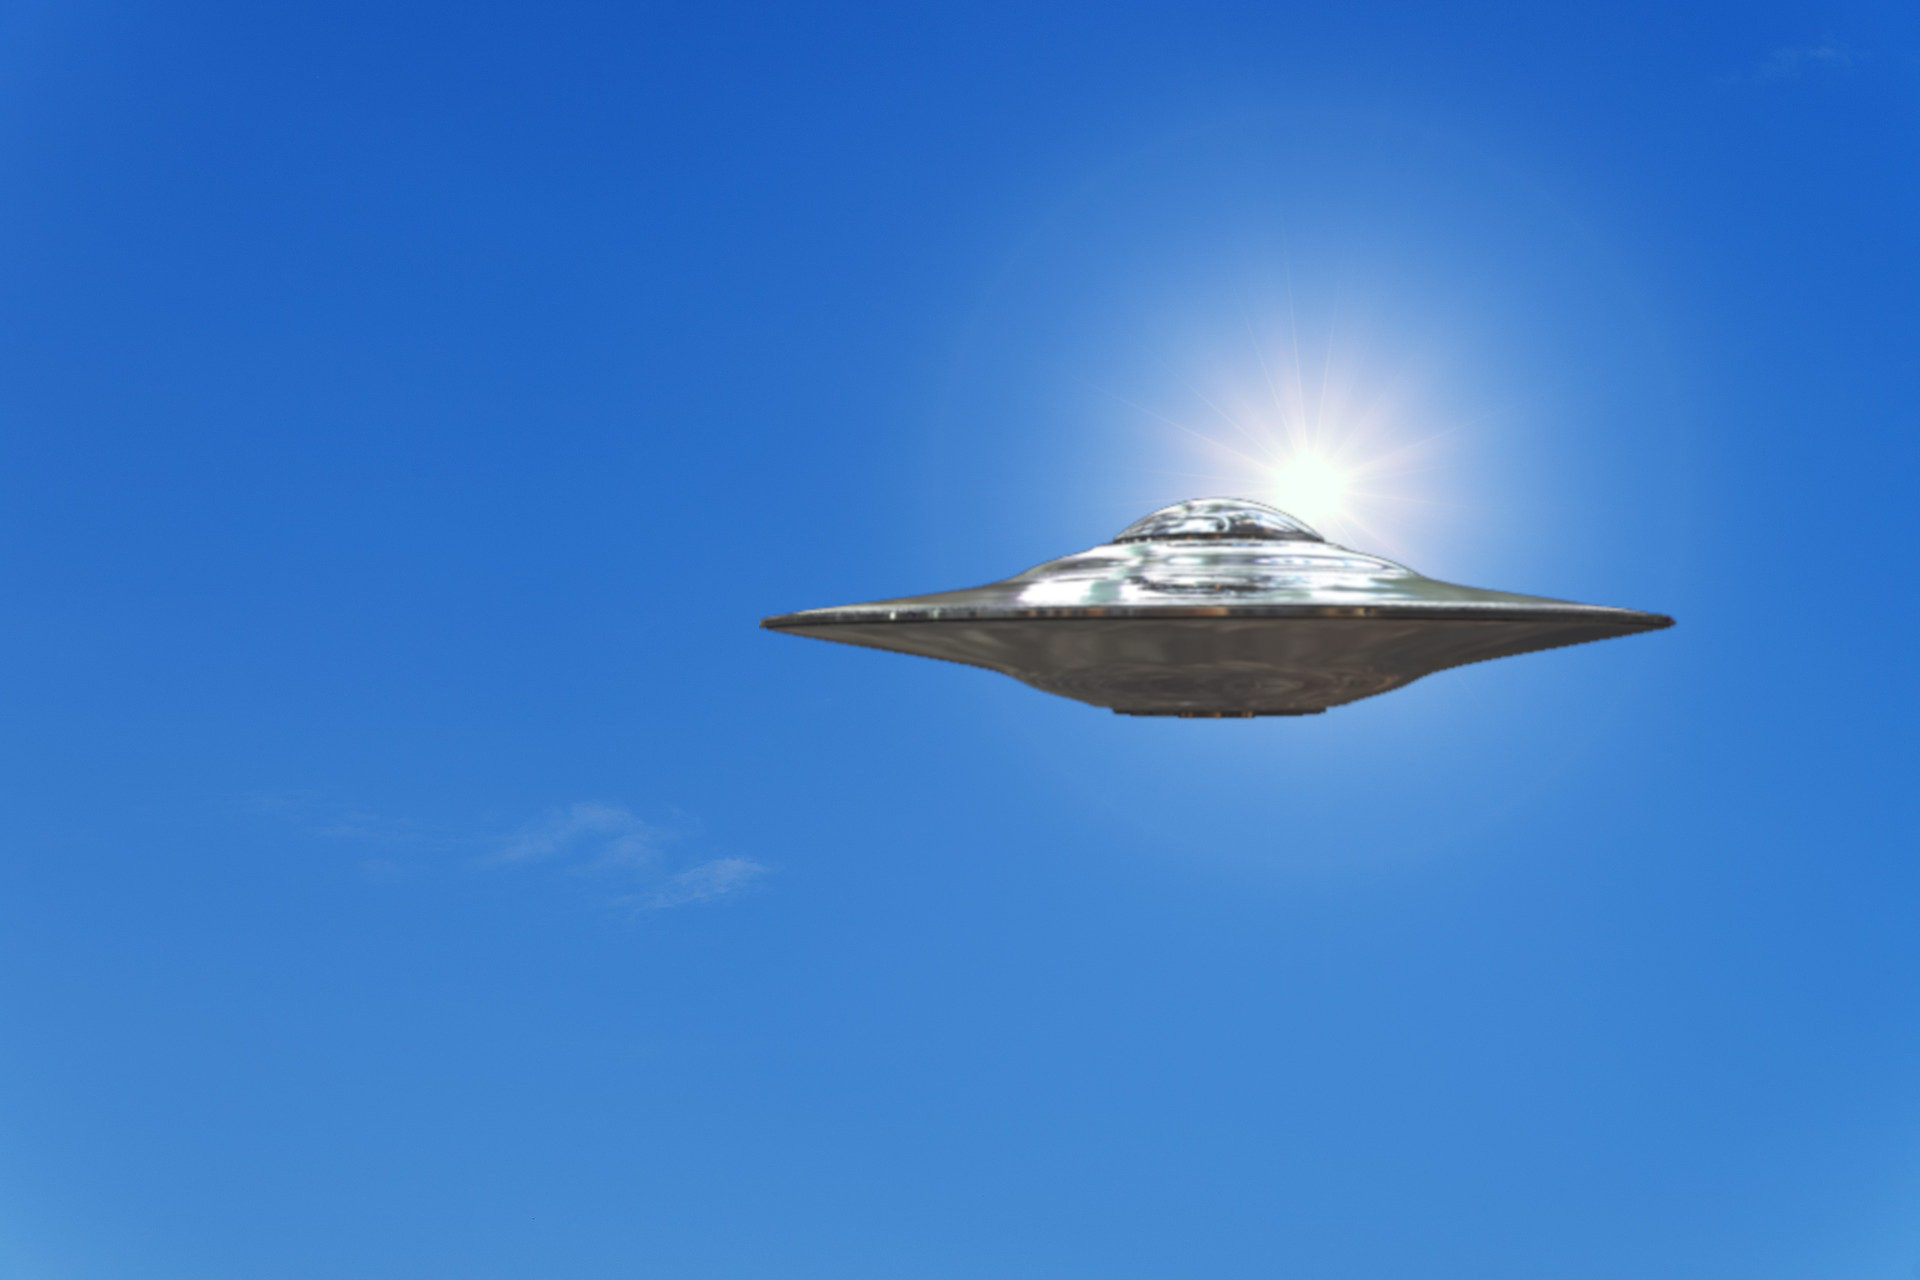 A depiction of a UFO in the daylight sky